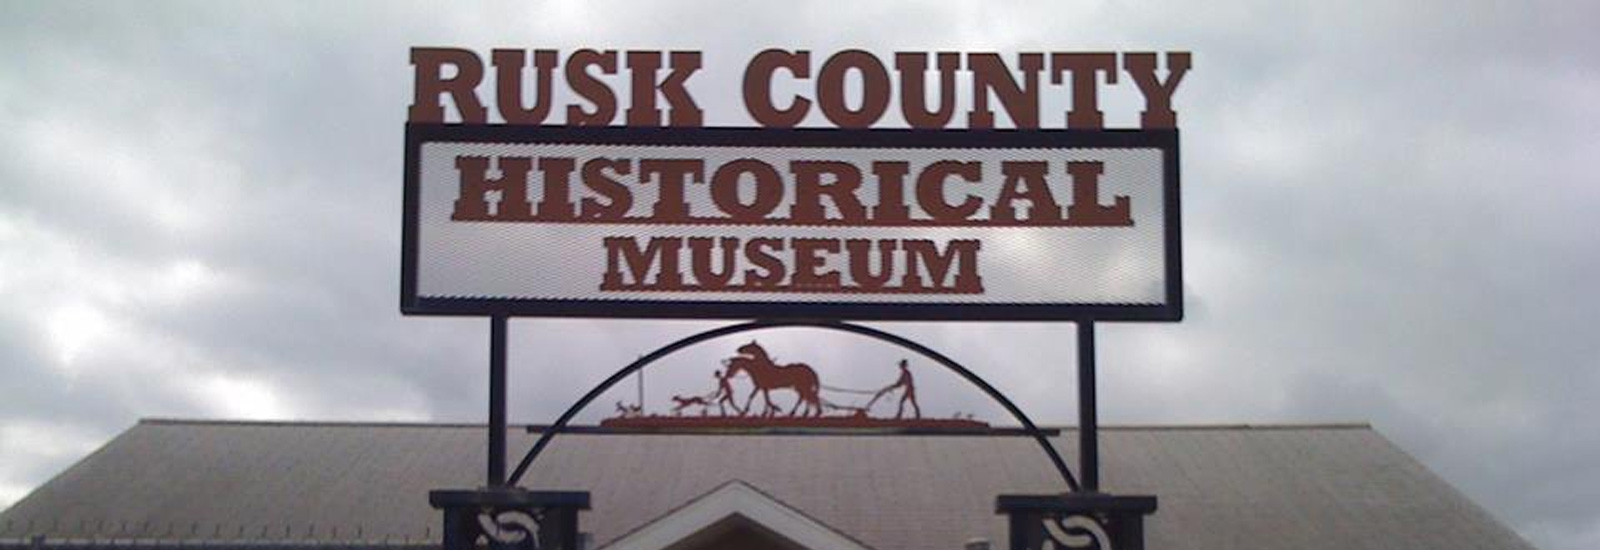 Rusk County Historical Museum